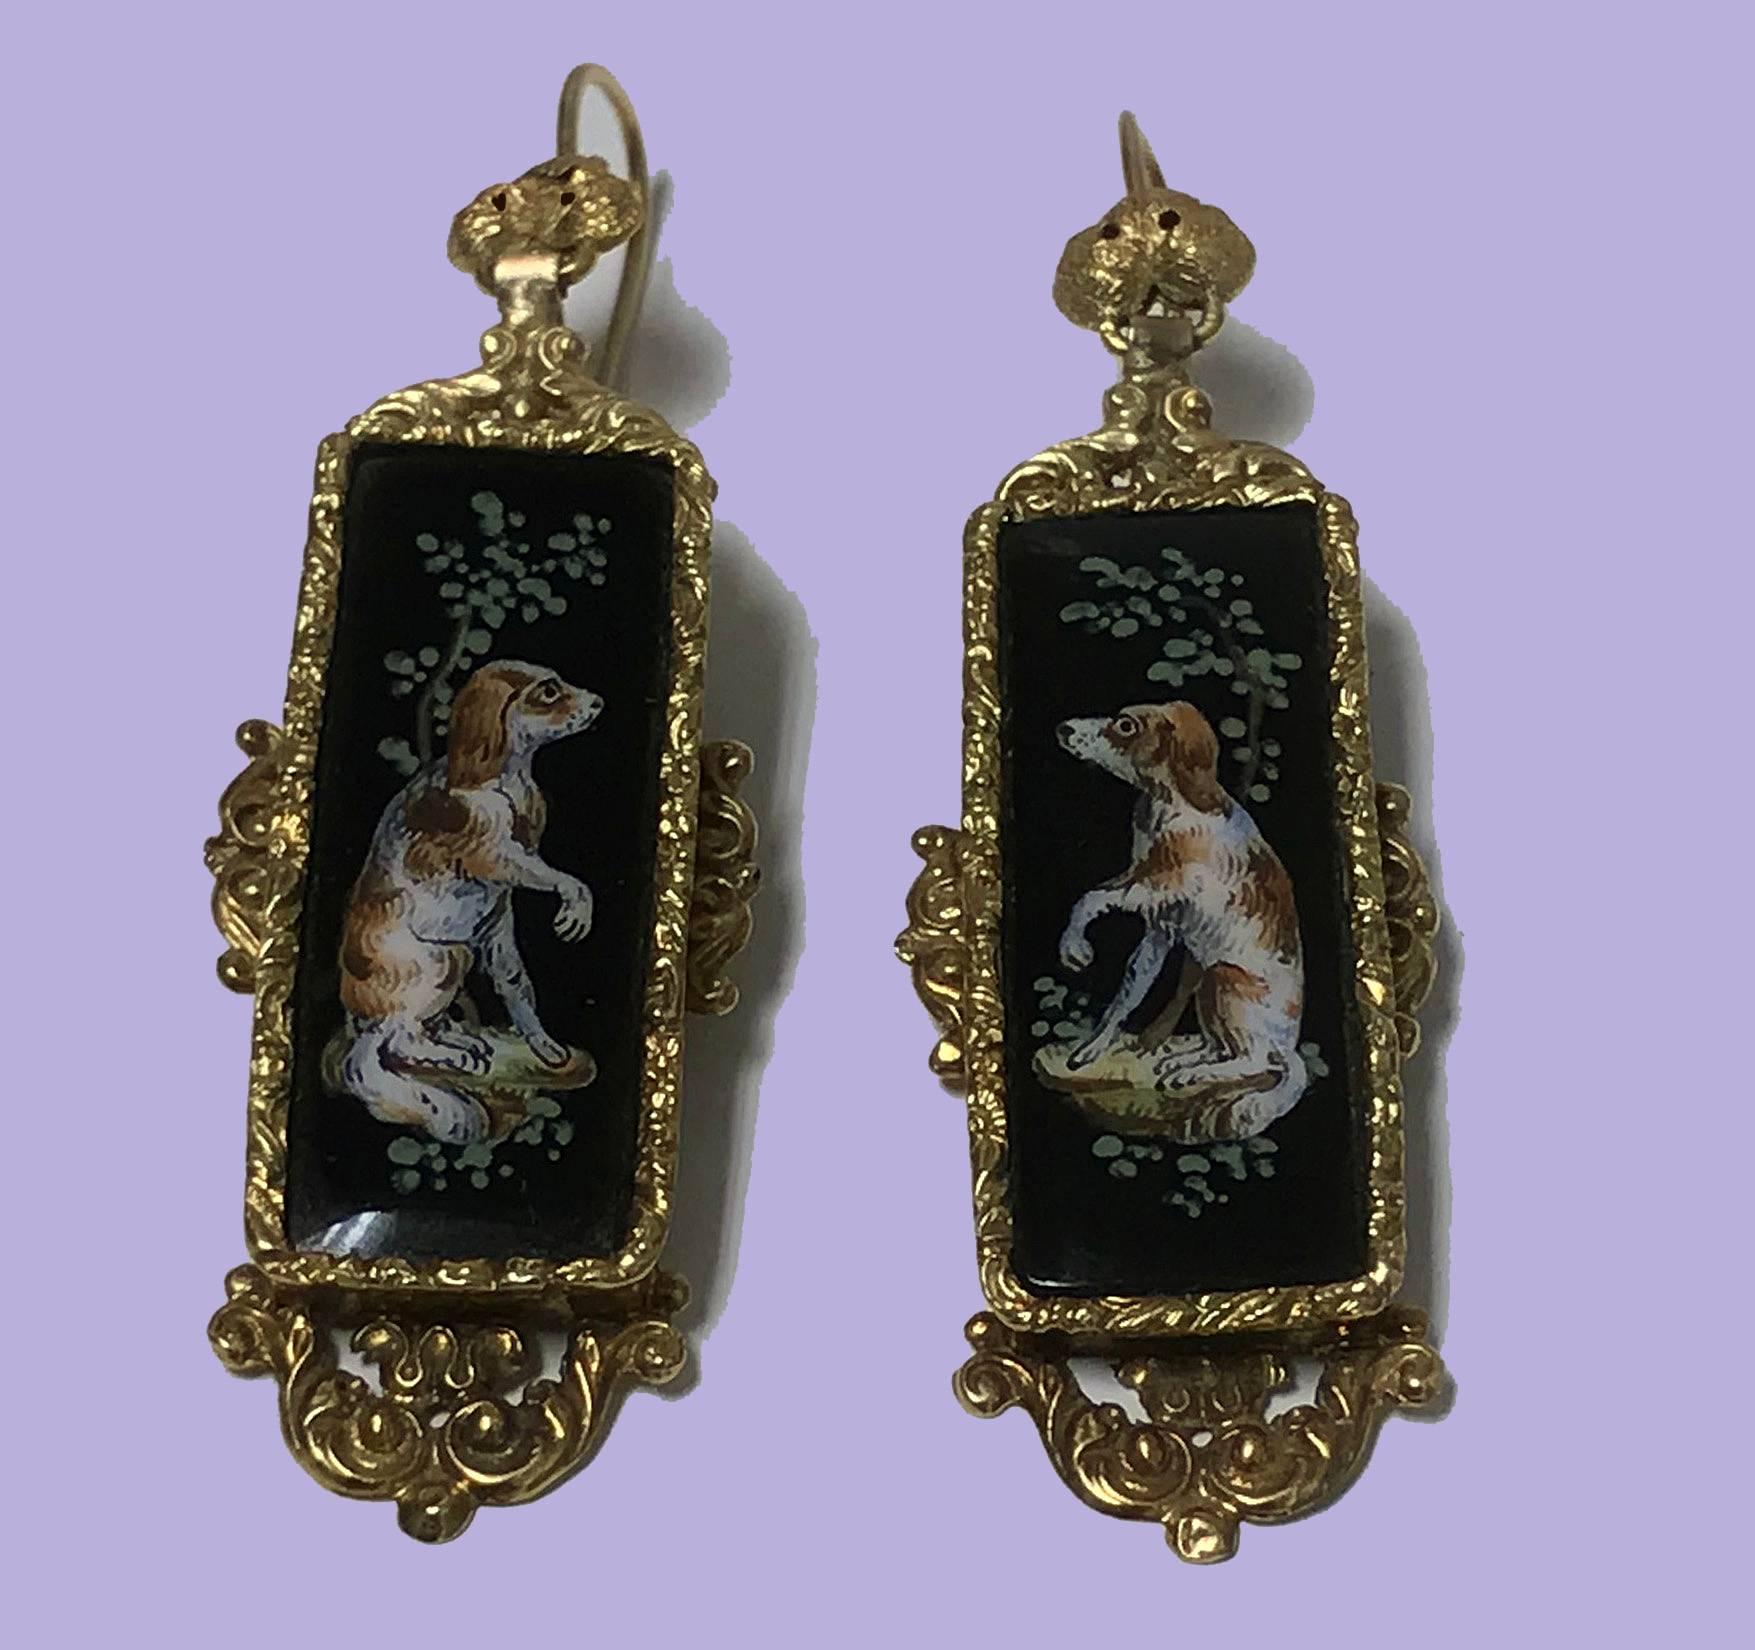 Pair of Antique 18K Enamel `Spaniel’ Earrings, Continental, C.1875. Each of rectangular drop form depicting an enameled seated spaniel with raised paw on black background in sylvan landscape, 18K (tested) gold foliage surround border, hook clip